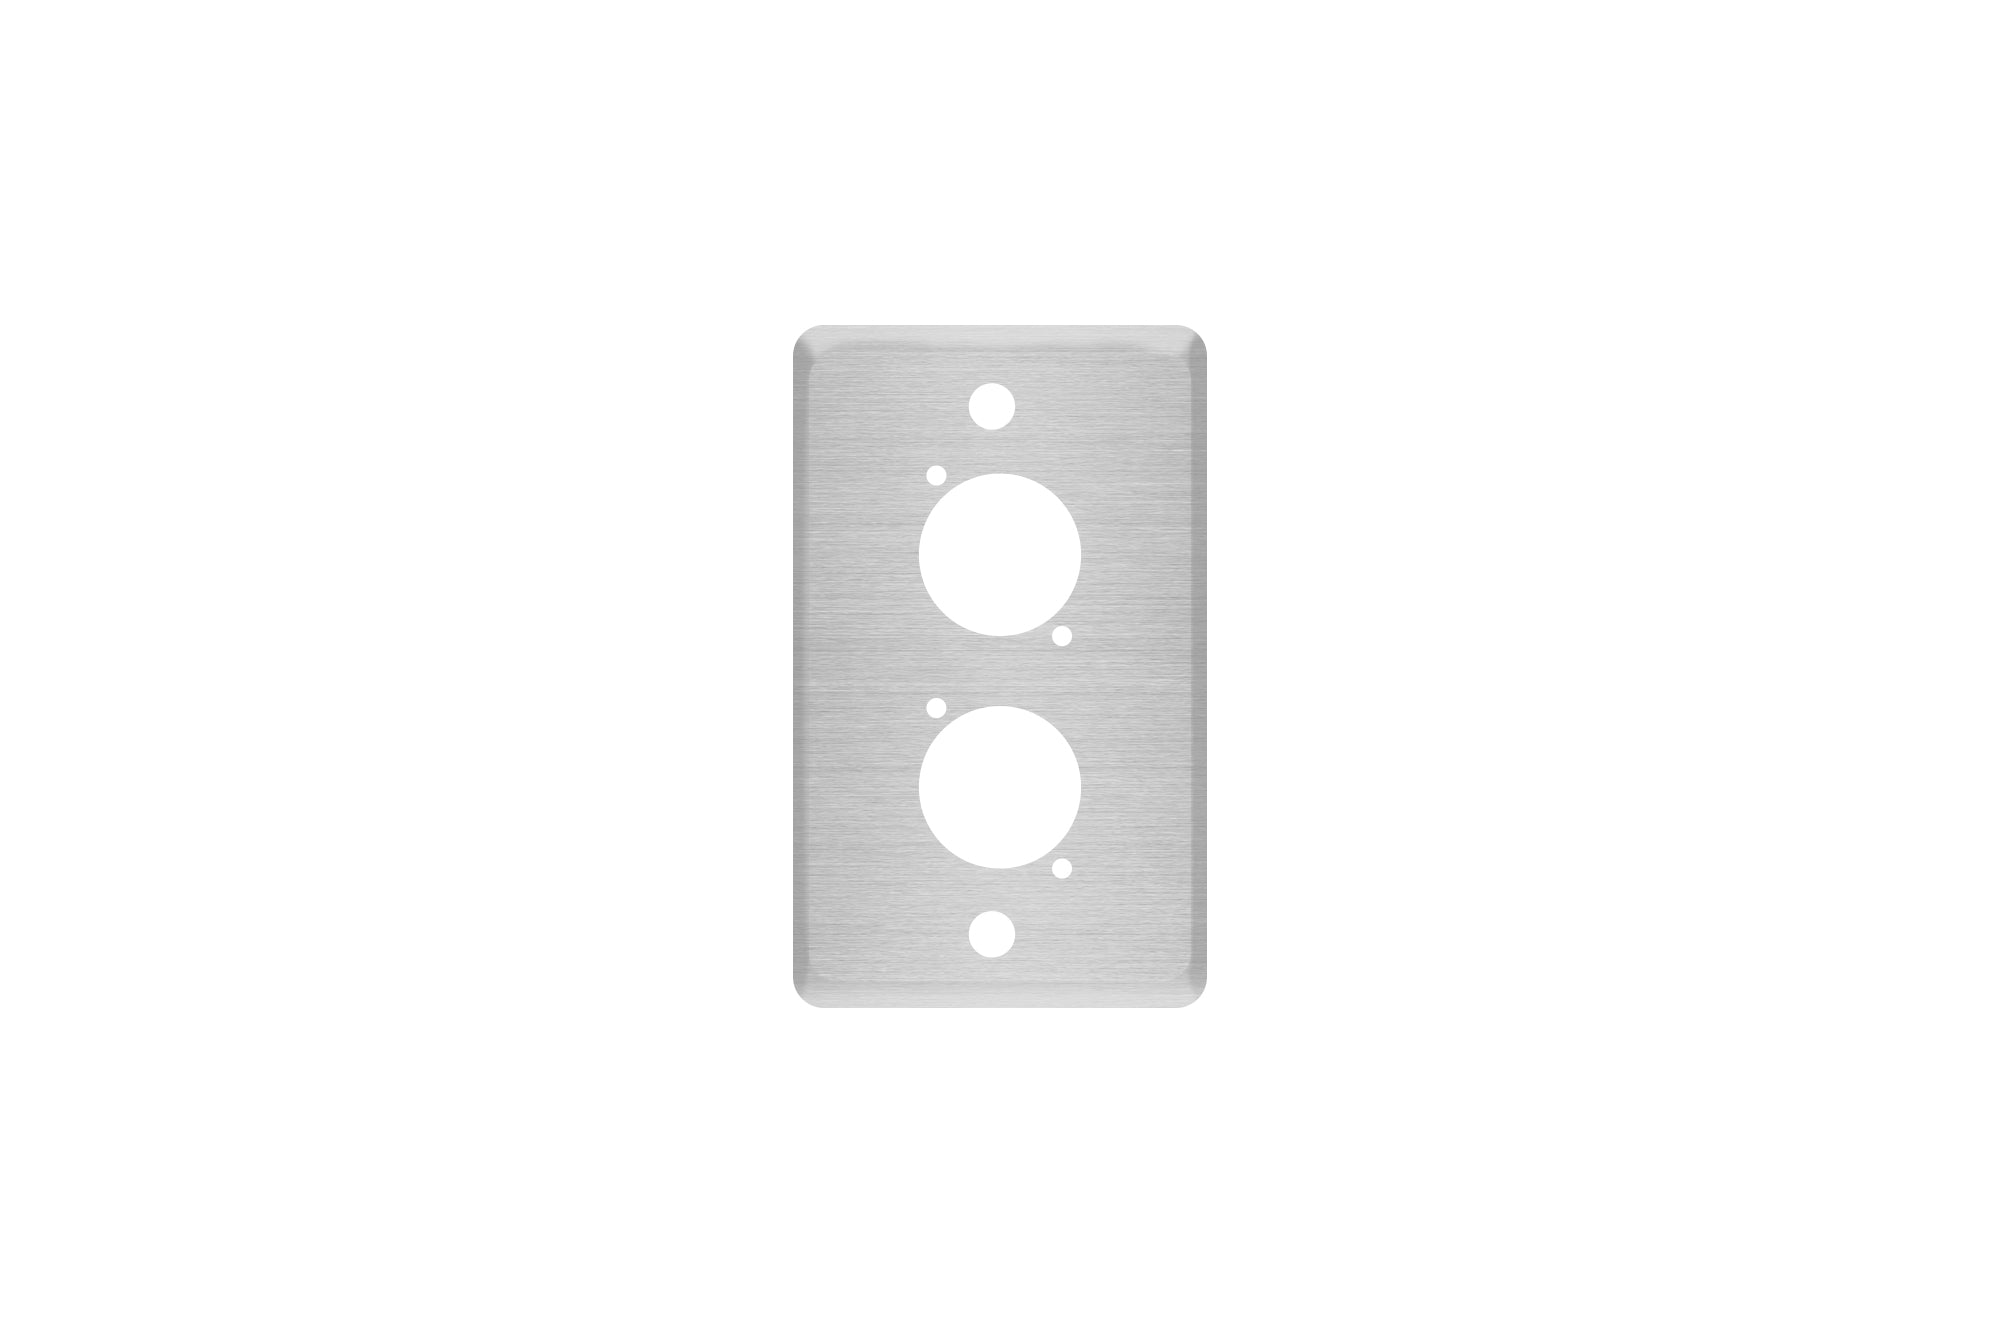 OSP D-2-BLANK Single Gang Duplex Wall Plate with 2 Series "D" Holes